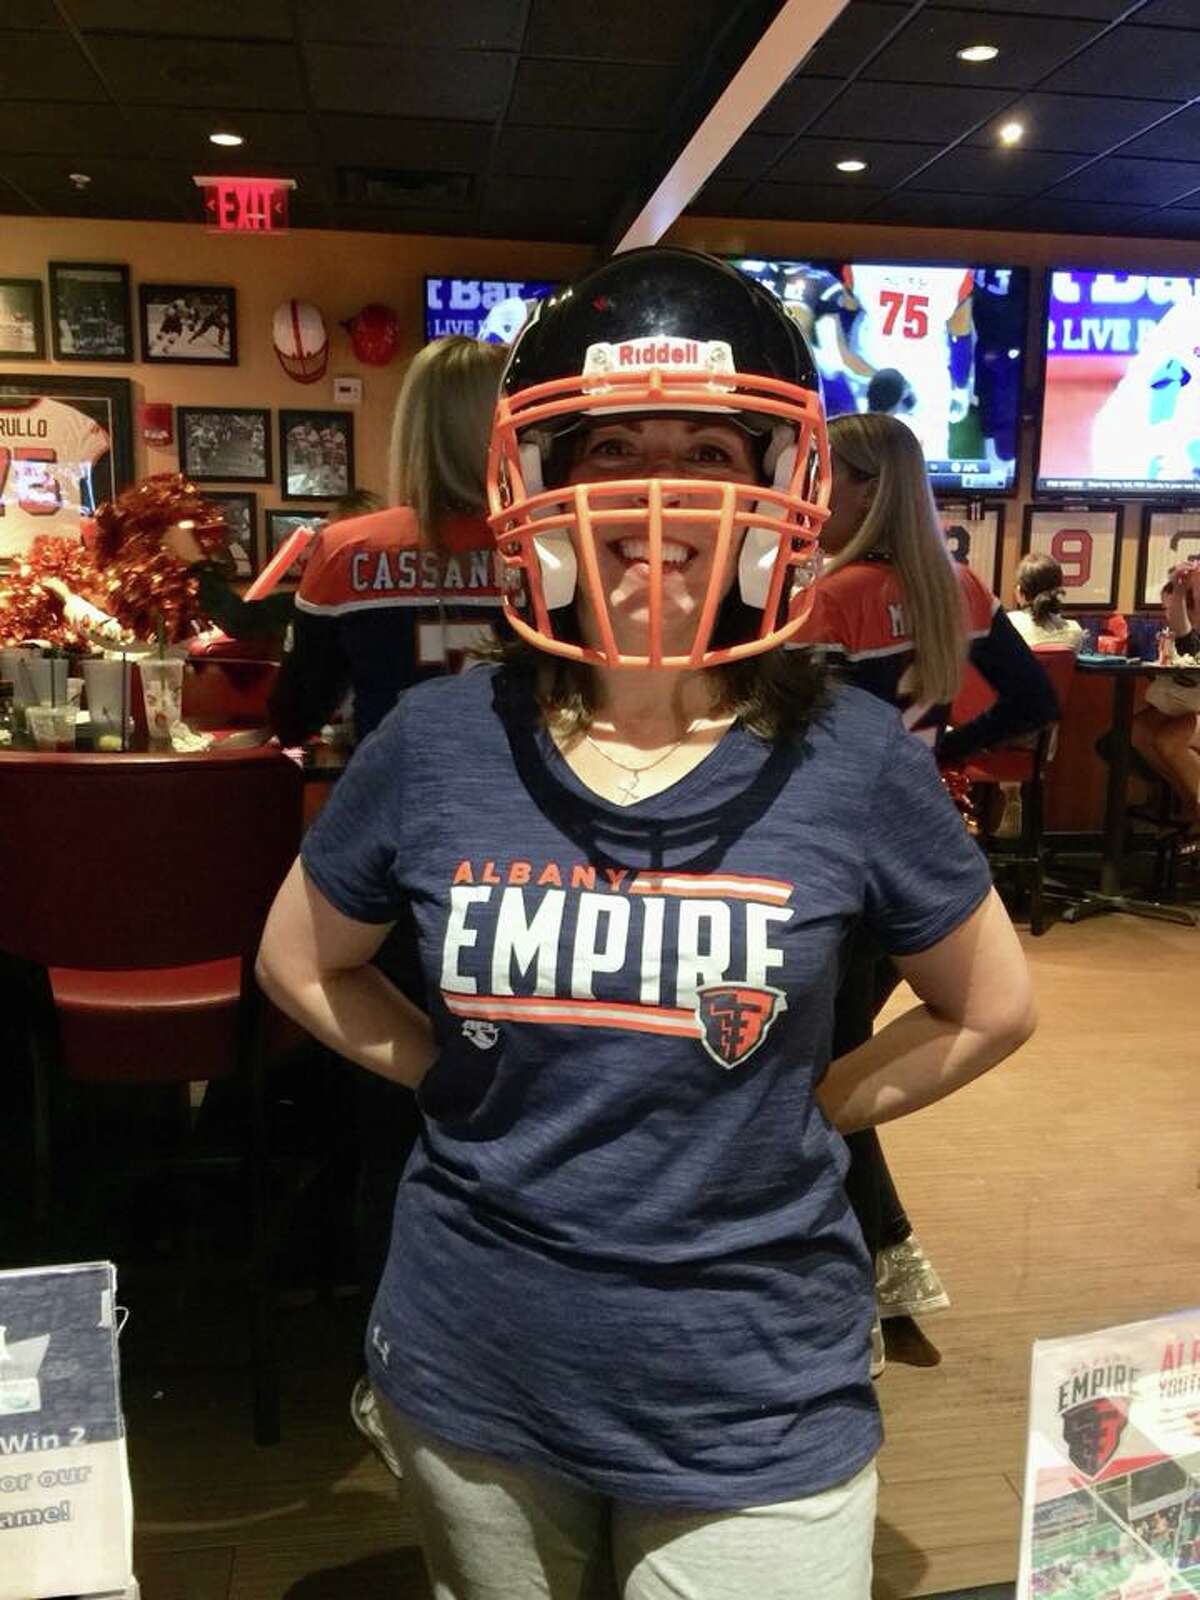 During Arena Football season, you would've found me screaming my head off at every Albany Empire home game! I loved them so much, and sponsored the team from the beginning.